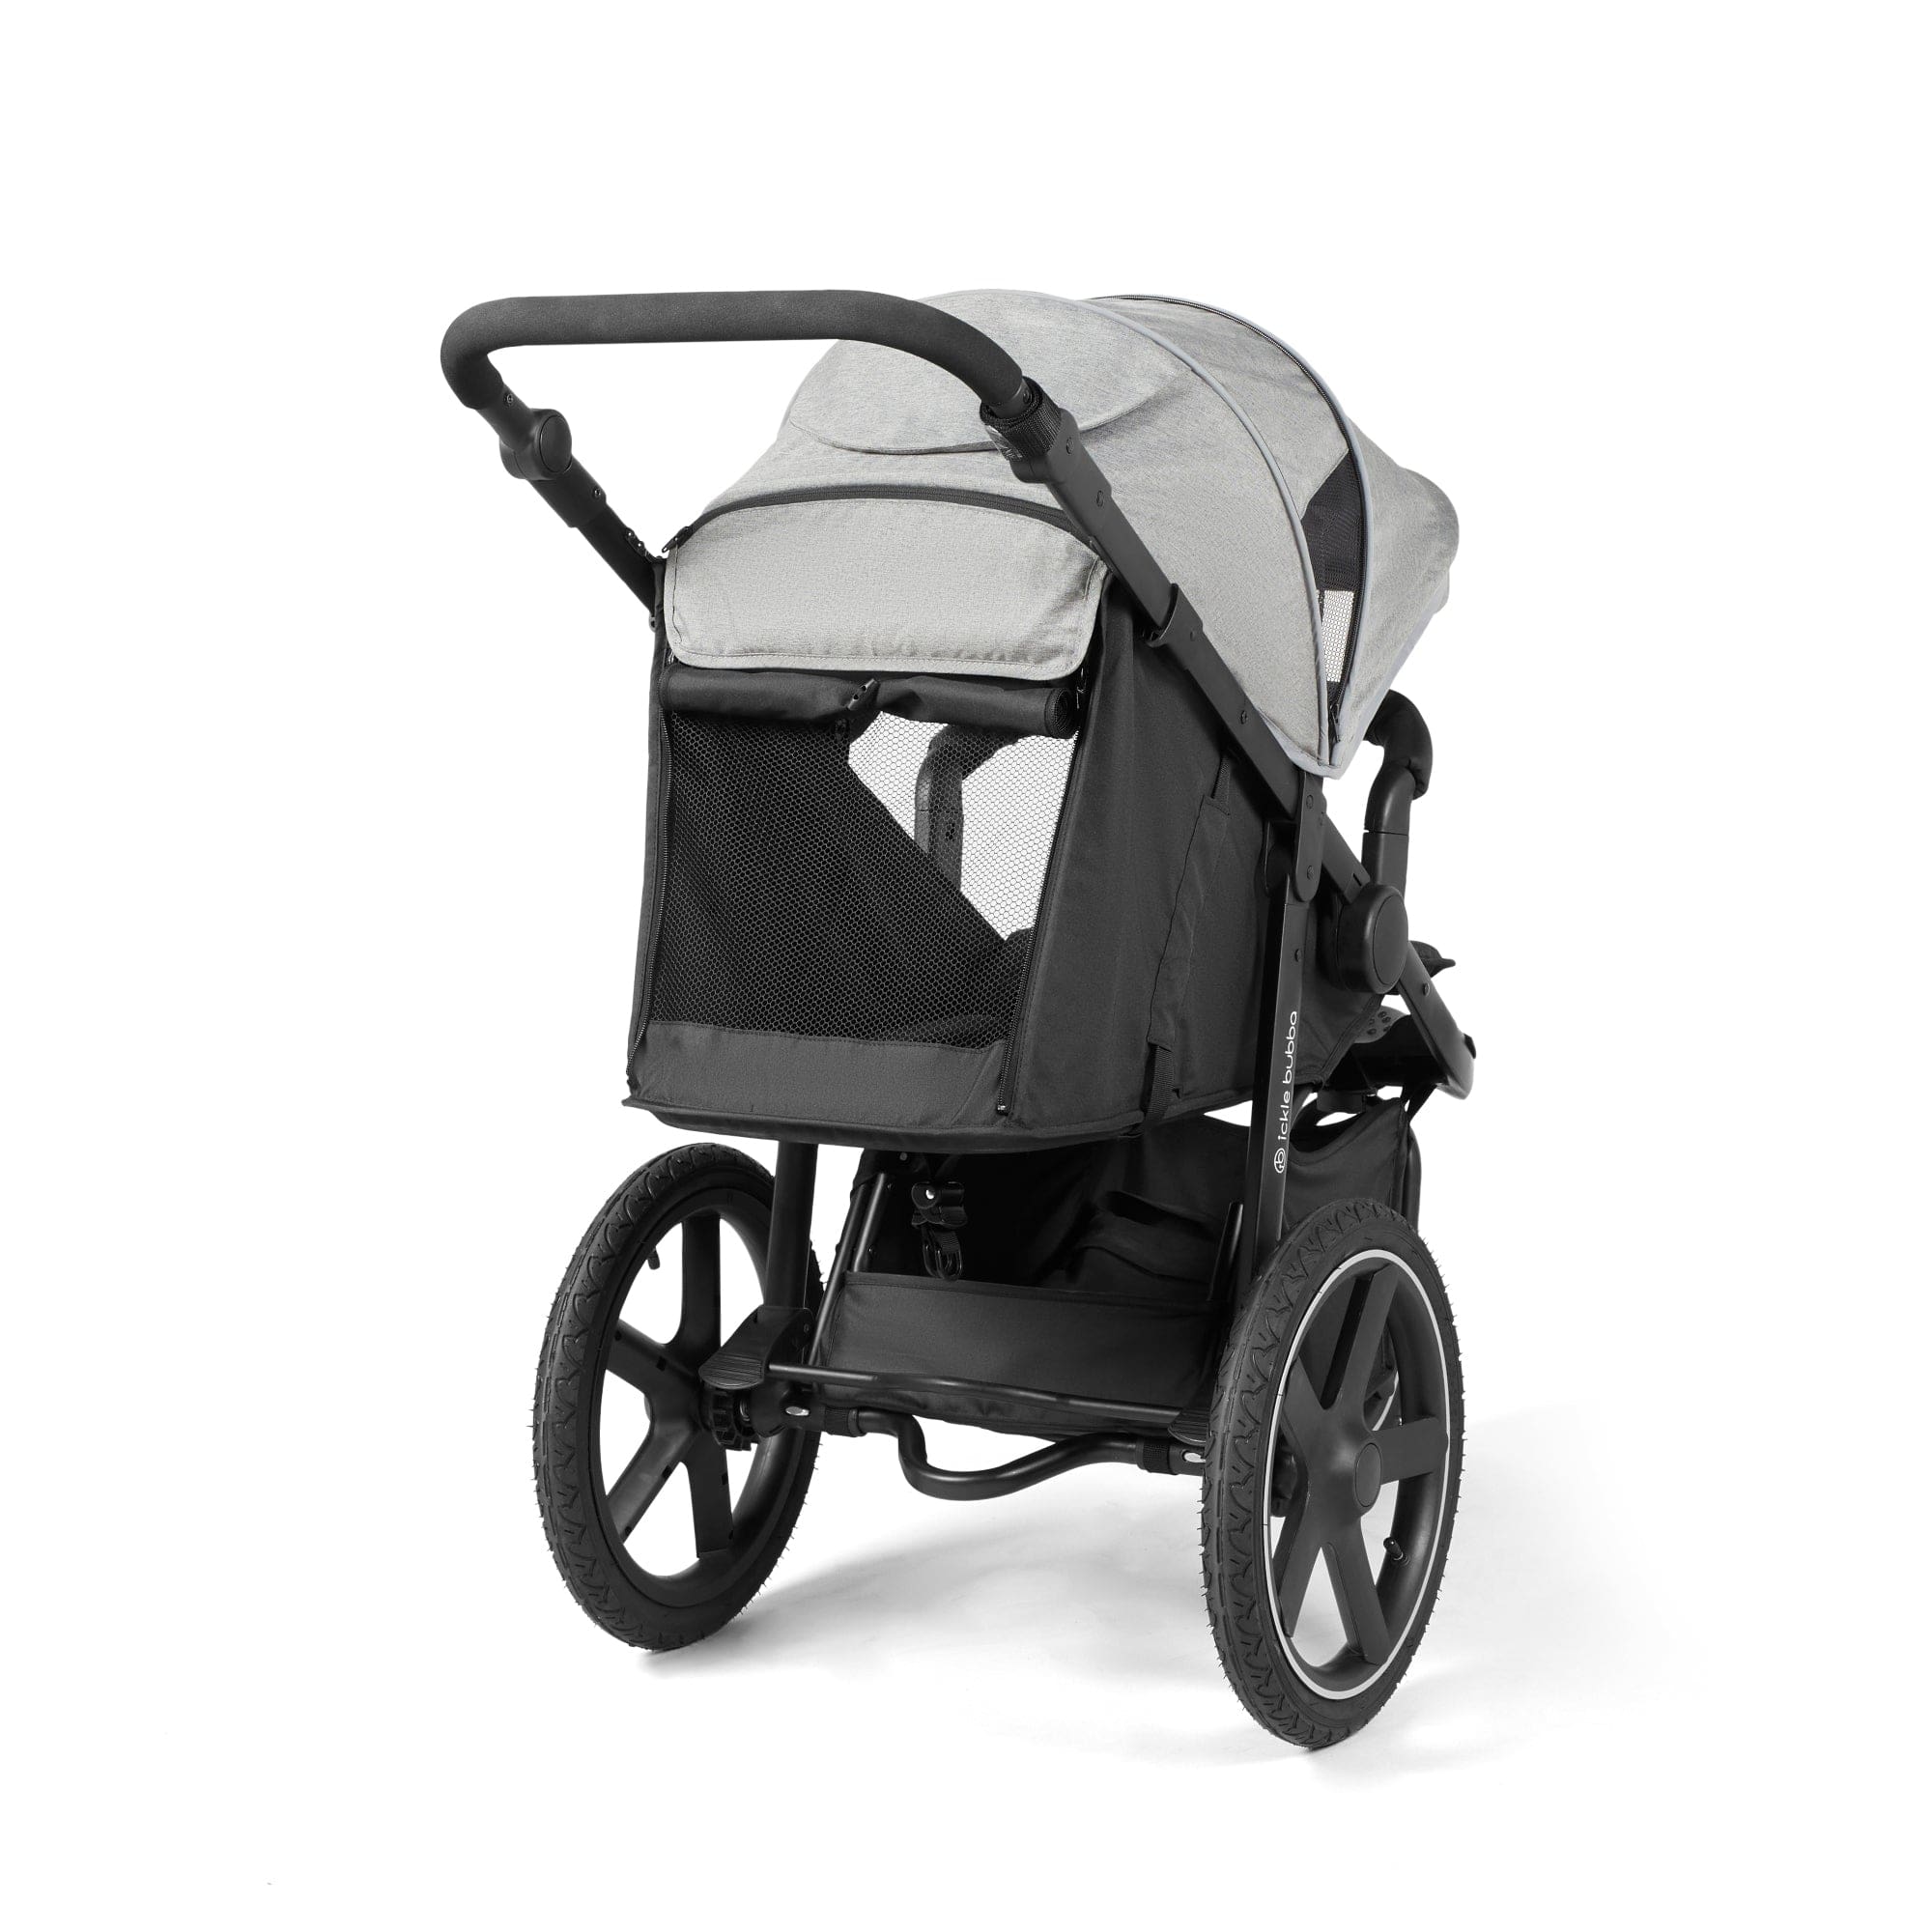 Ickle Bubba 3 wheel pushchairs Ickle Bubba Venus Prime Jogger Stroller I-Size Travel System - Black/Space Grey with Base 13-004-600-014